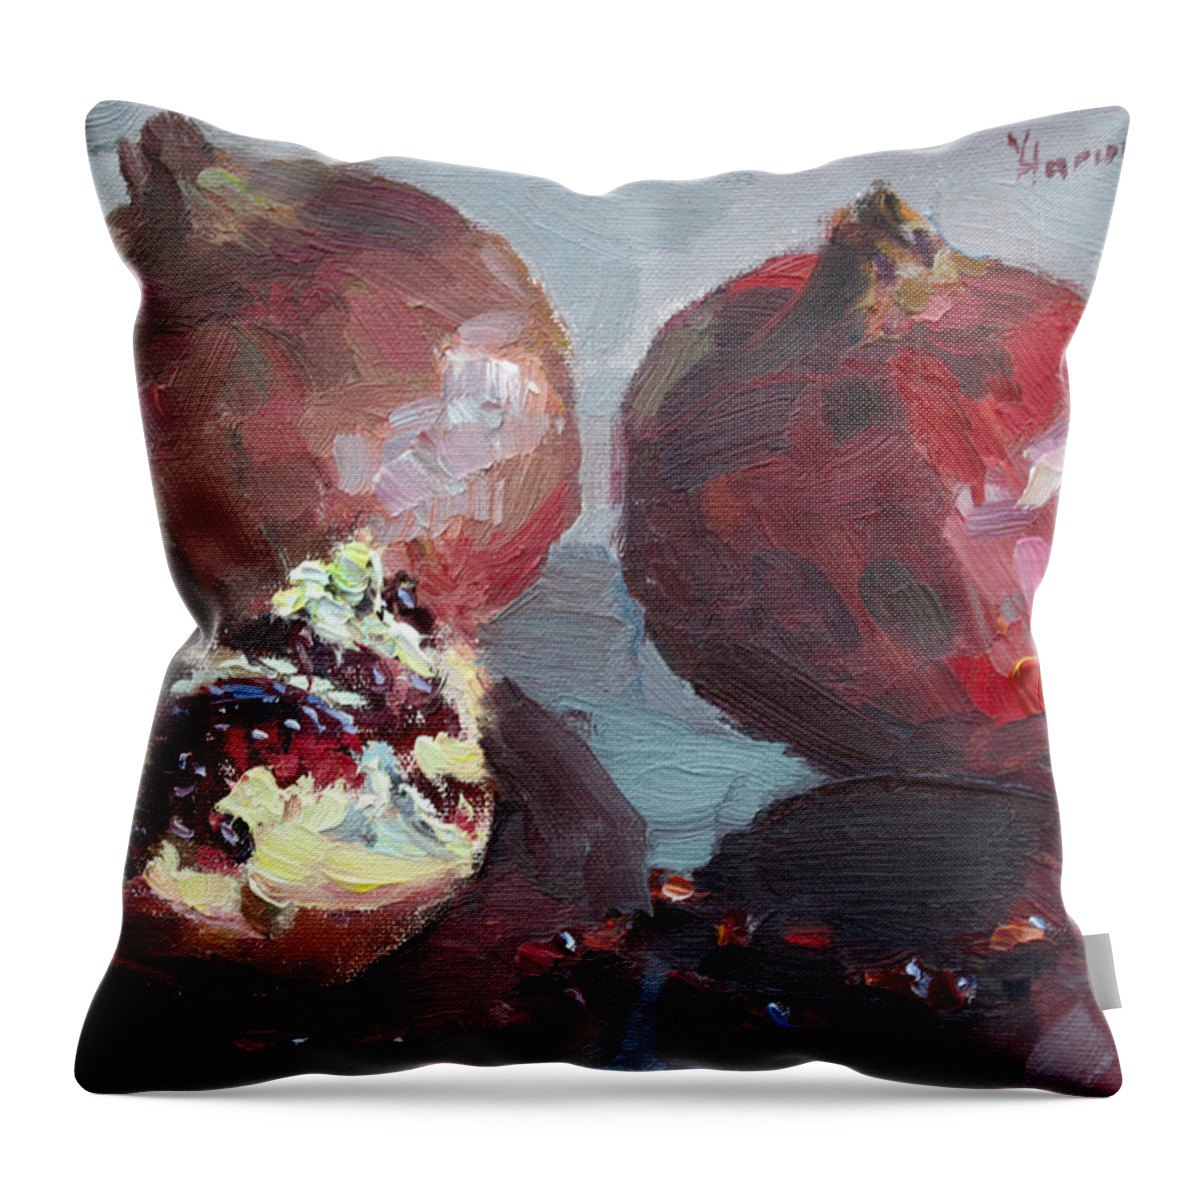 Pomegranates Throw Pillow featuring the painting Pomegranates by Ylli Haruni